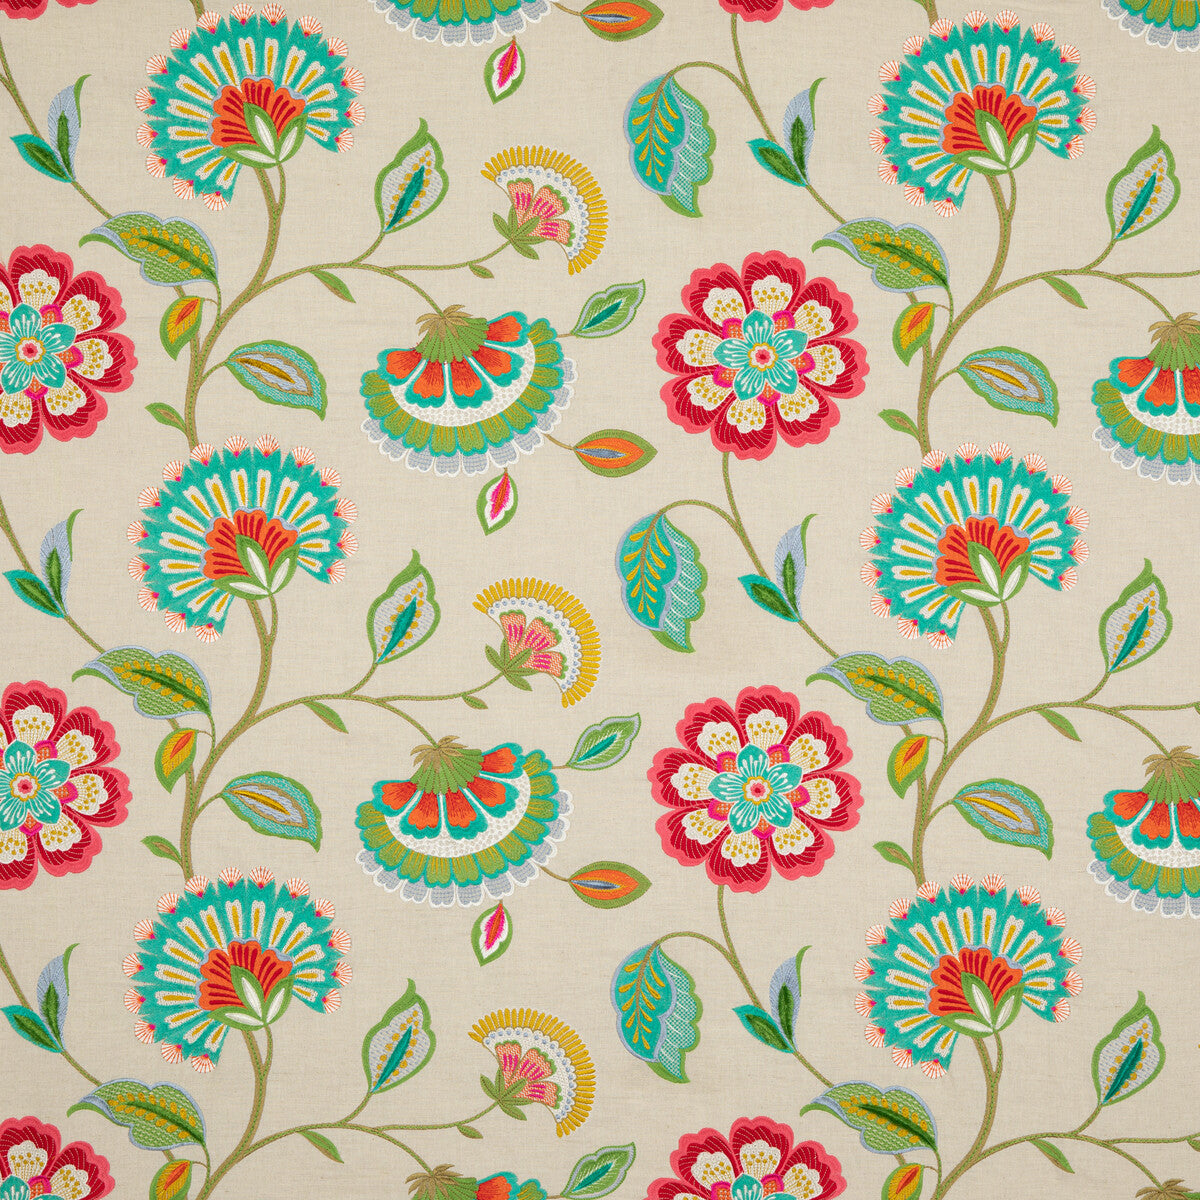 Scentsational fabric in multi color - pattern PF50463.1.0 - by Baker Lifestyle in the Fiesta collection